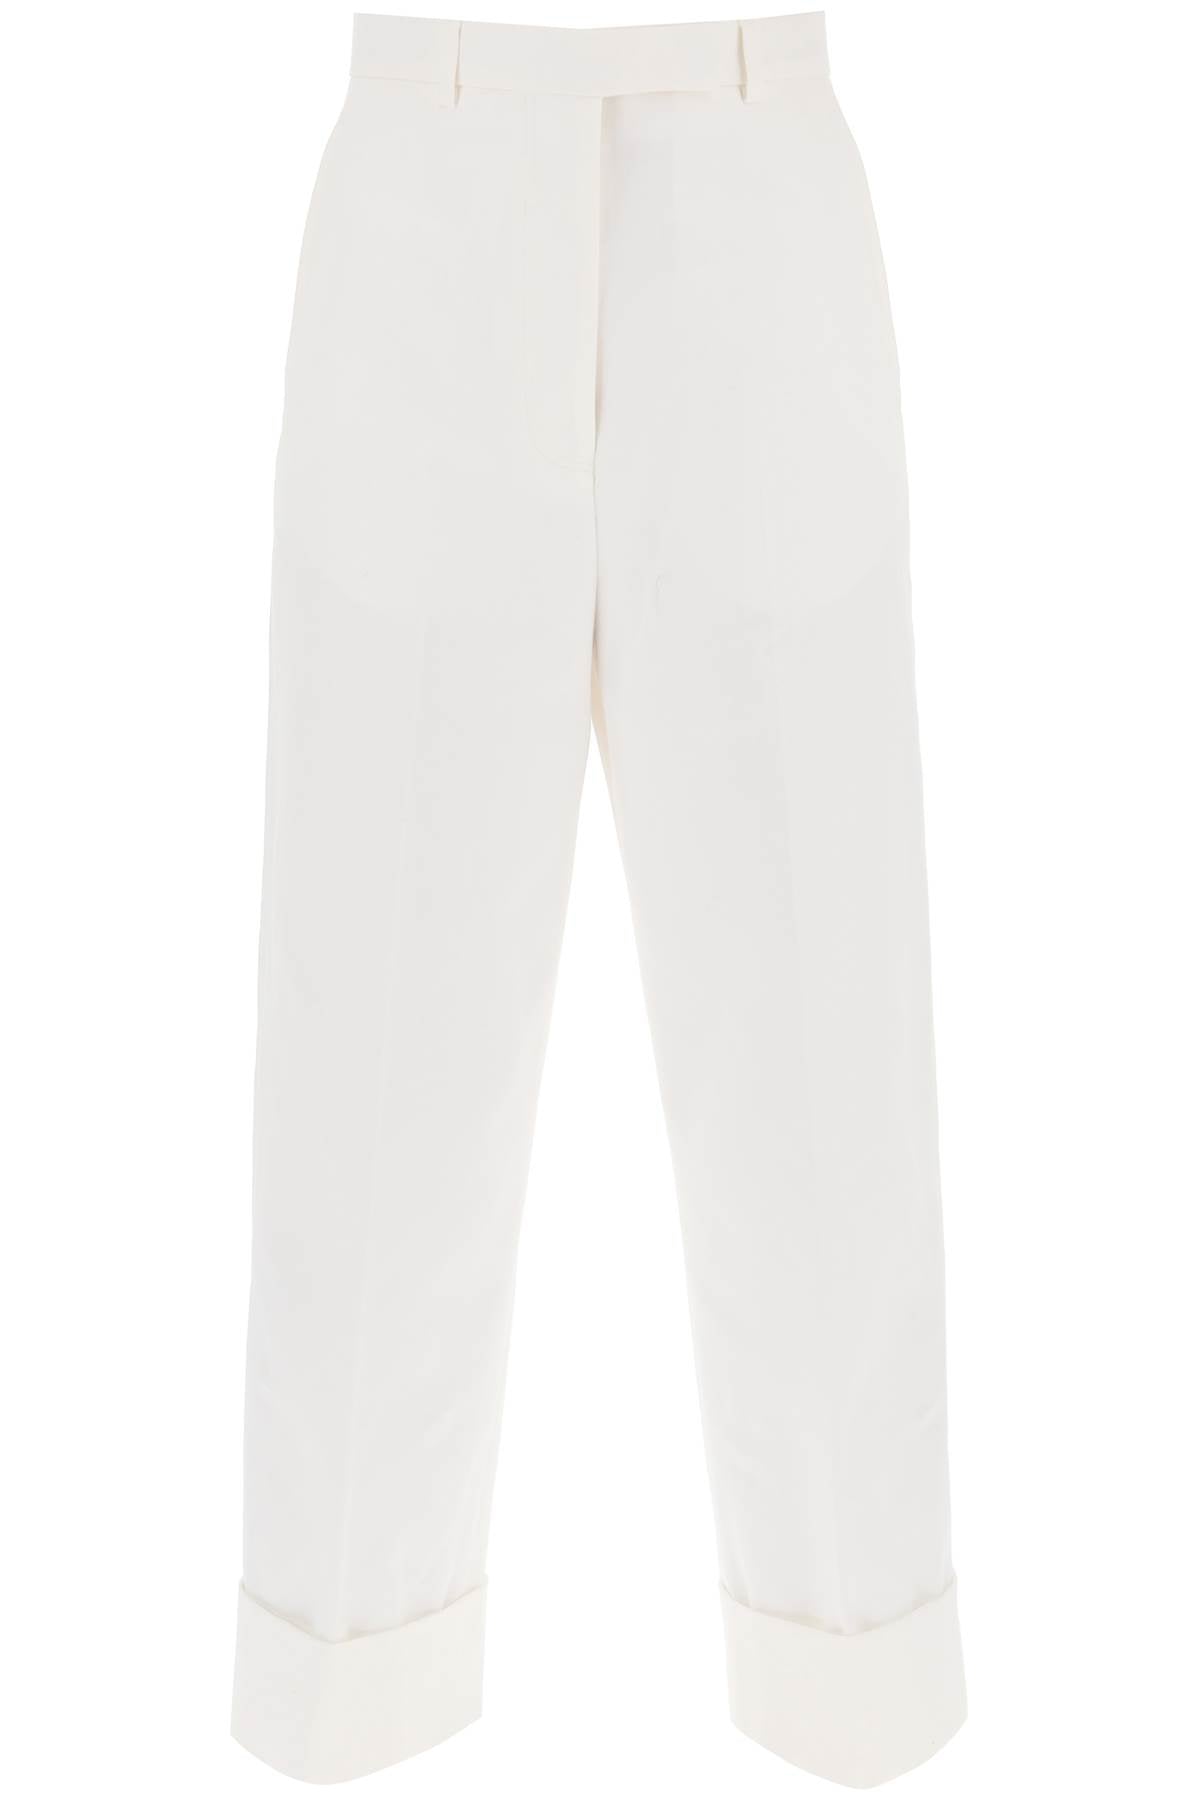 Thom browne cropped wide leg jeans-0